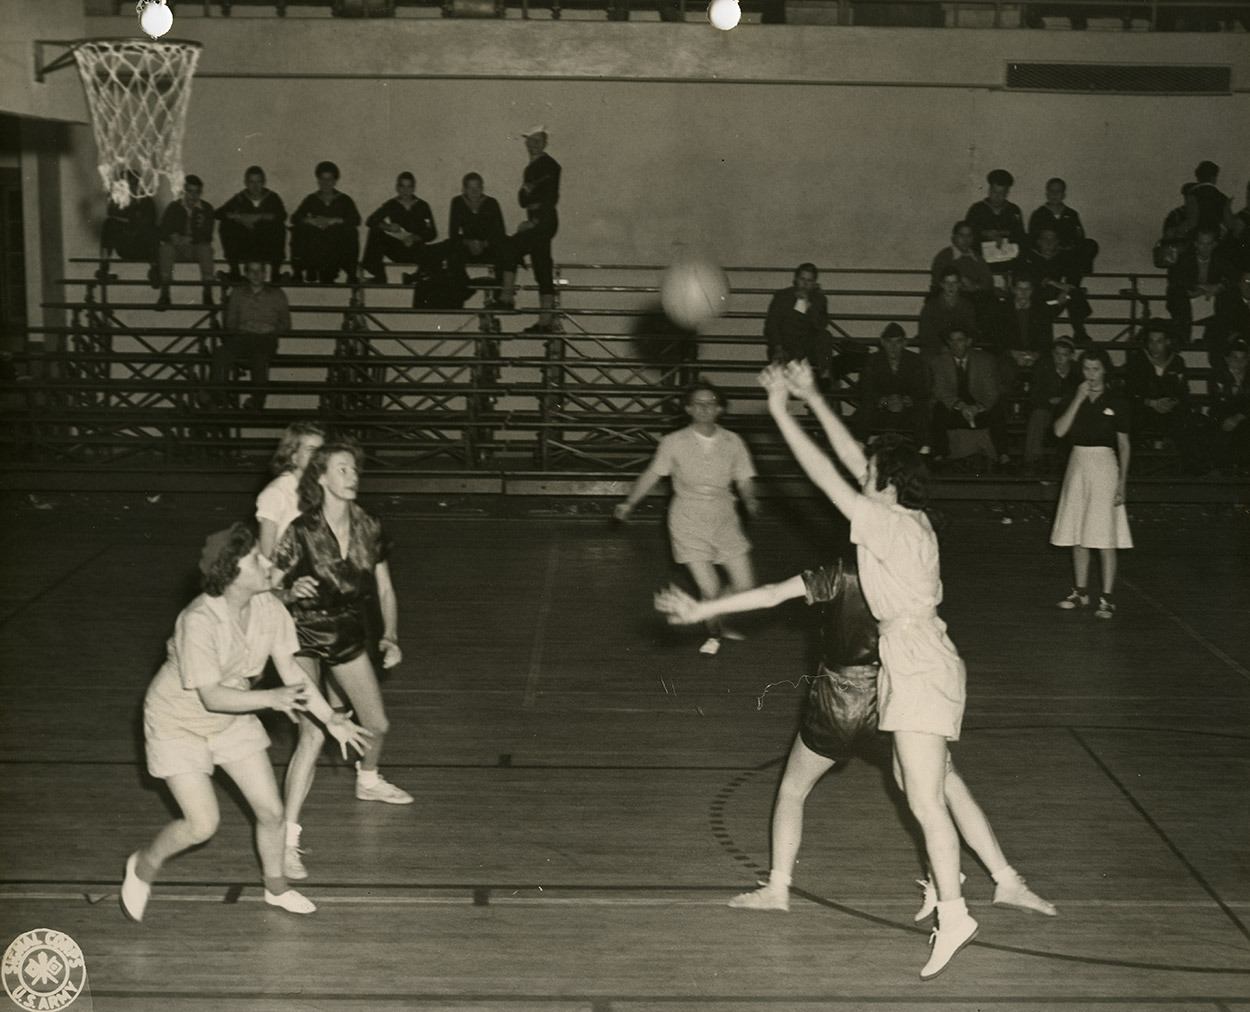 Women's Army Corps (WAC) Basketball Game